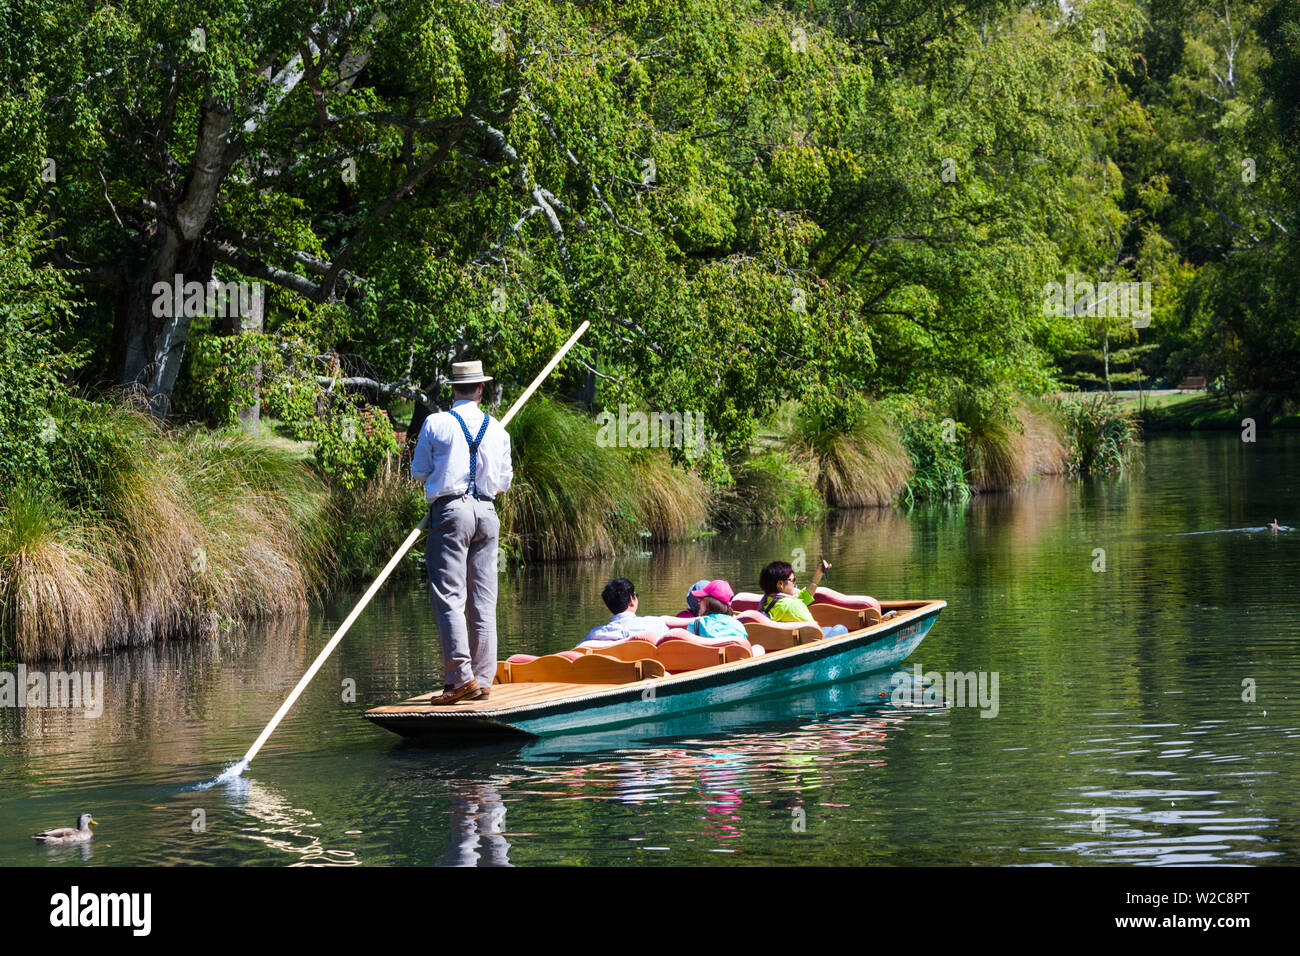 New Zealand, South Island, Christchurch, punting on the Avon River Stock Photo